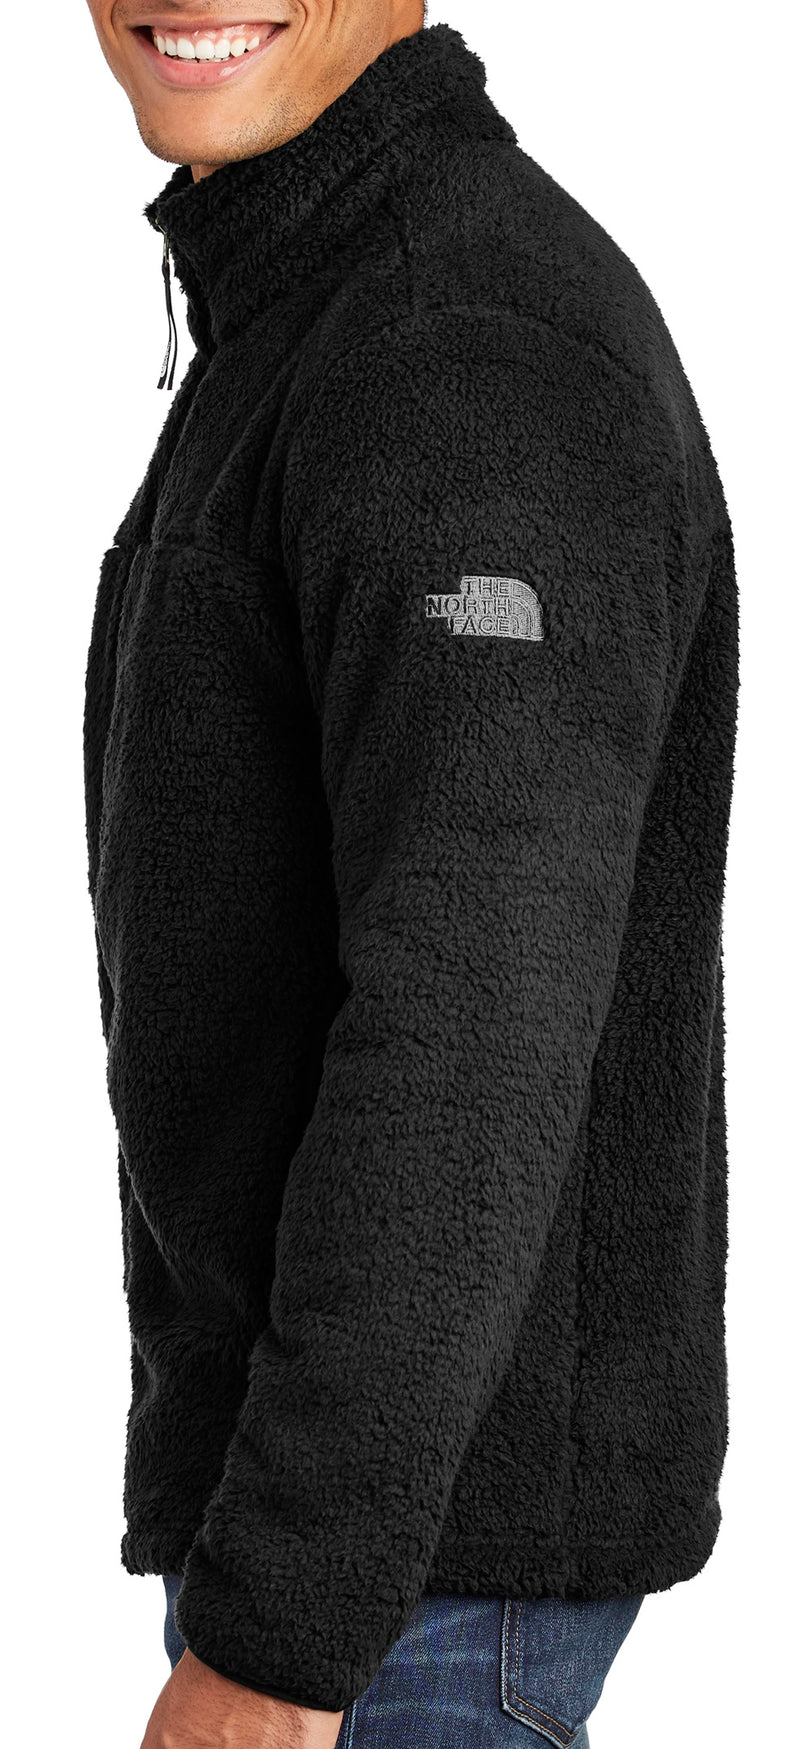 The North Face Ladies High Loft Fleece, Product